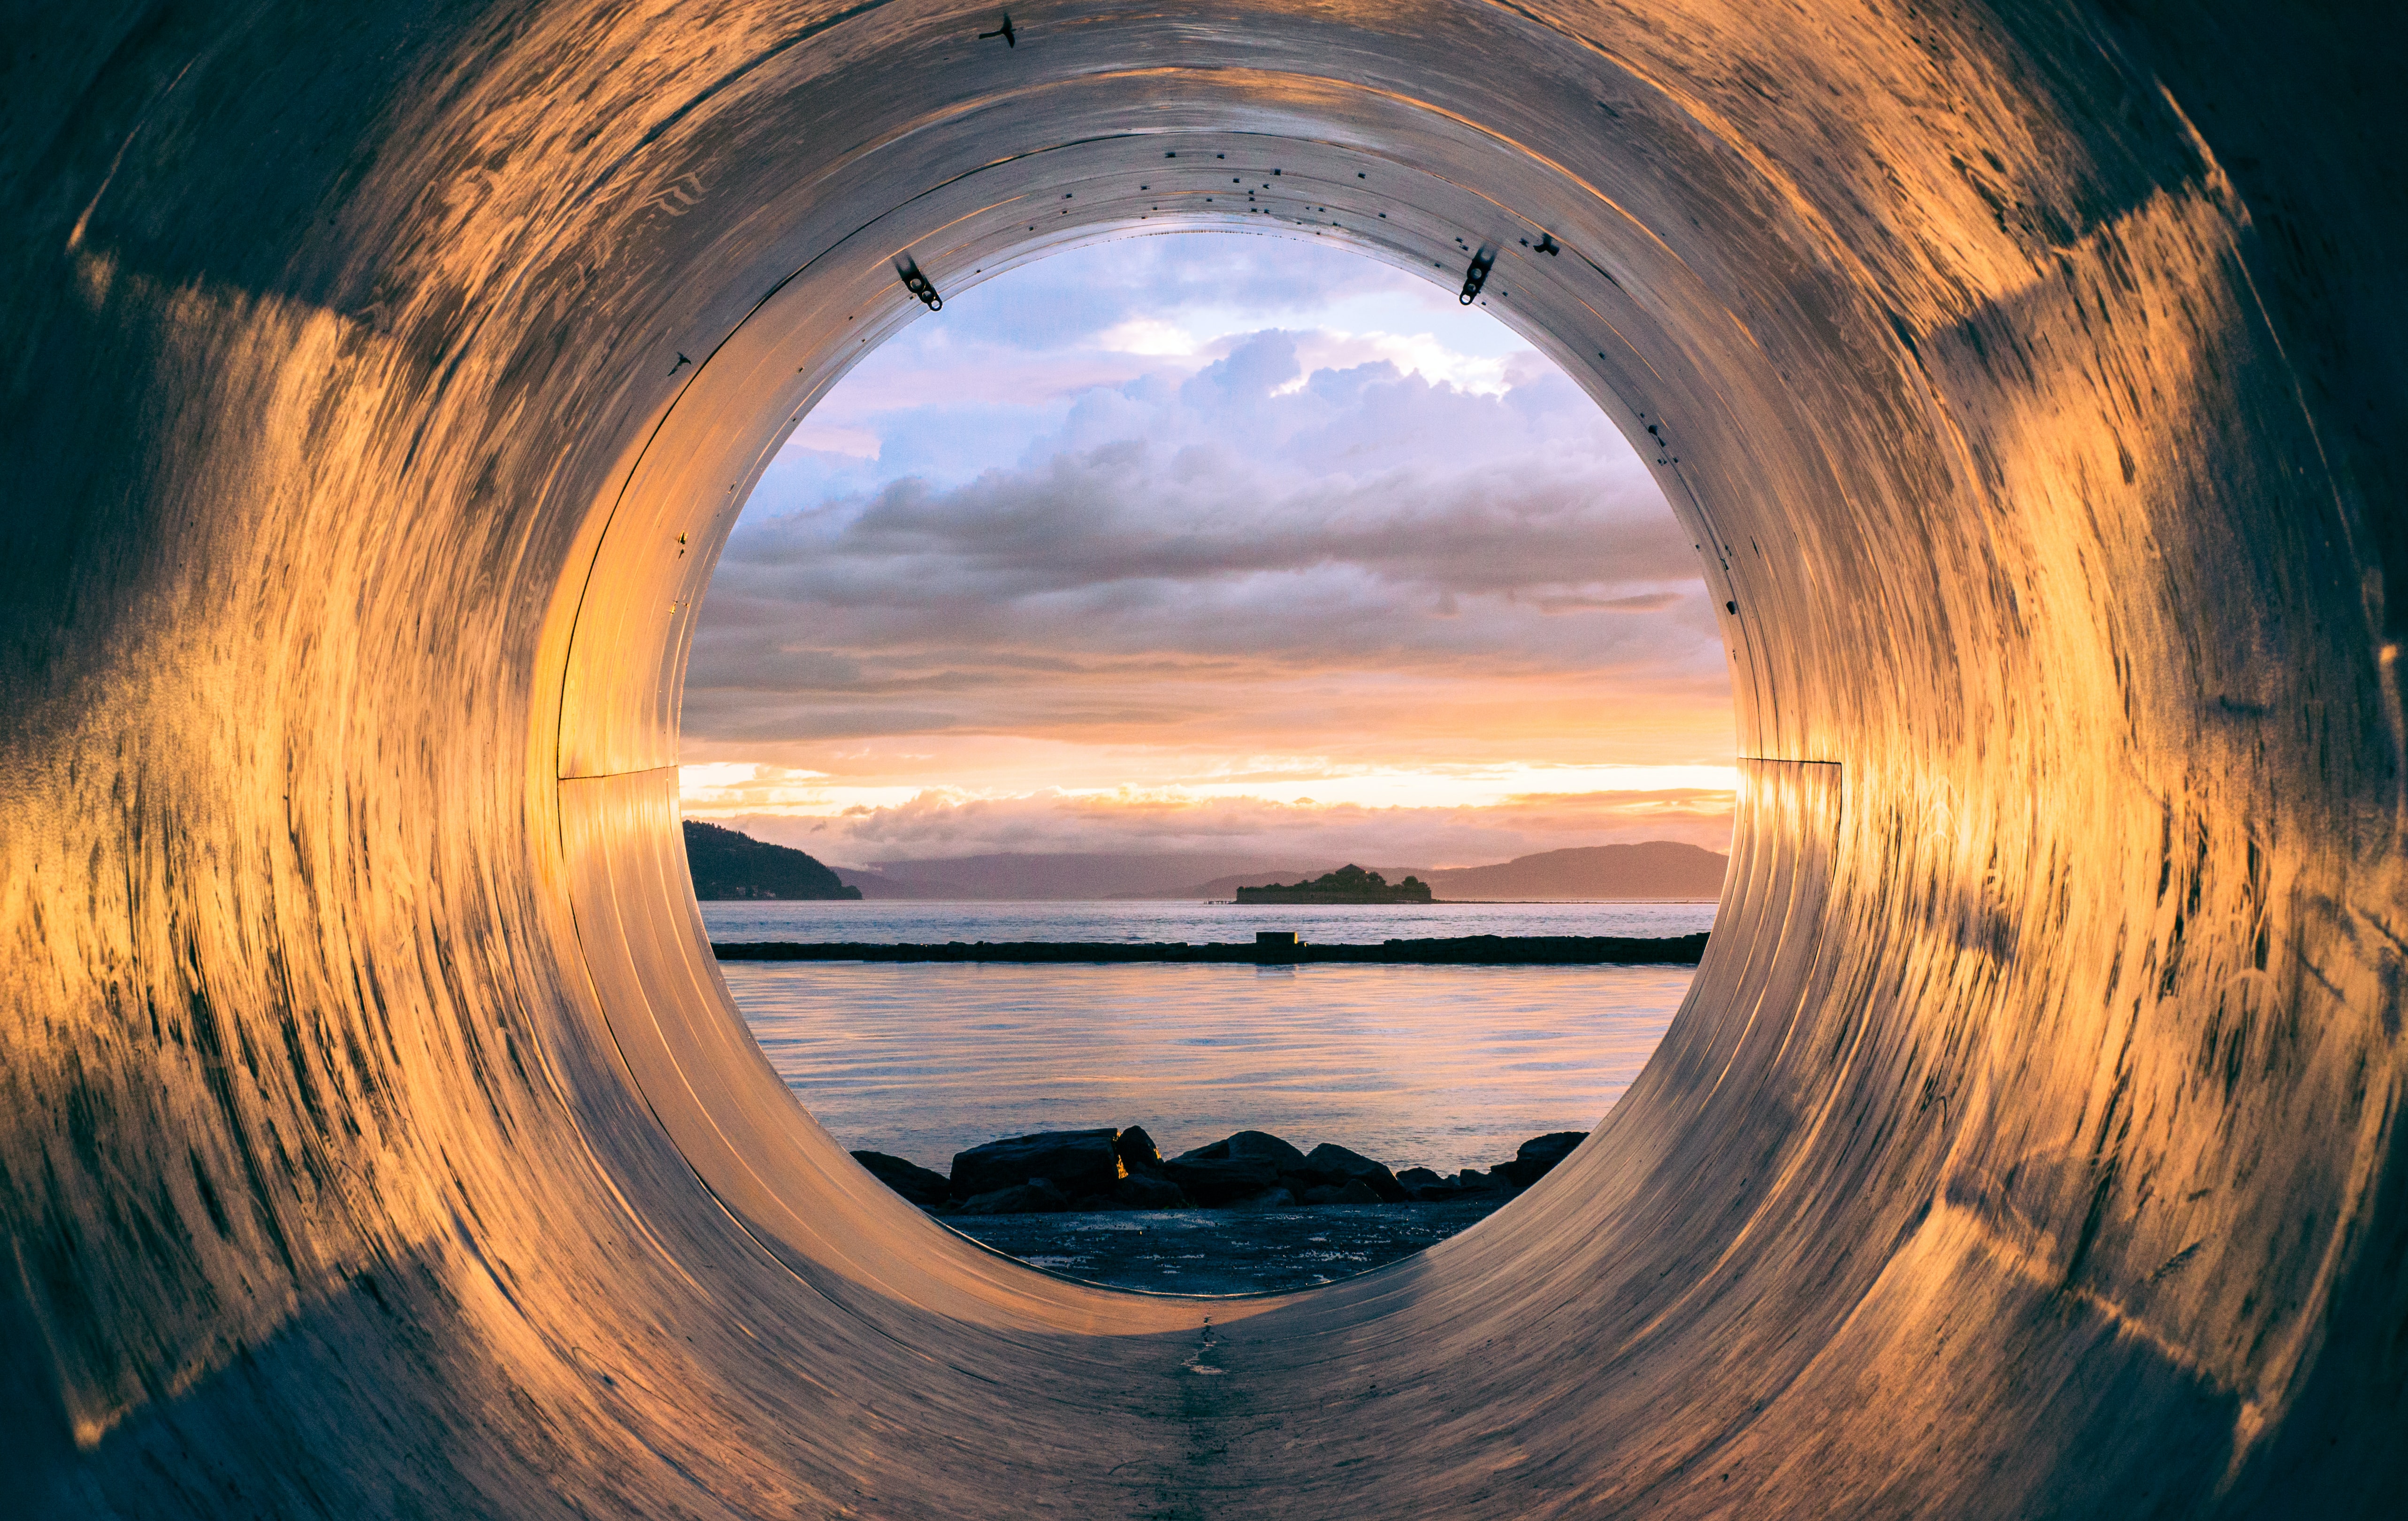 The view through a VPN tunnel into paradise, a secure network